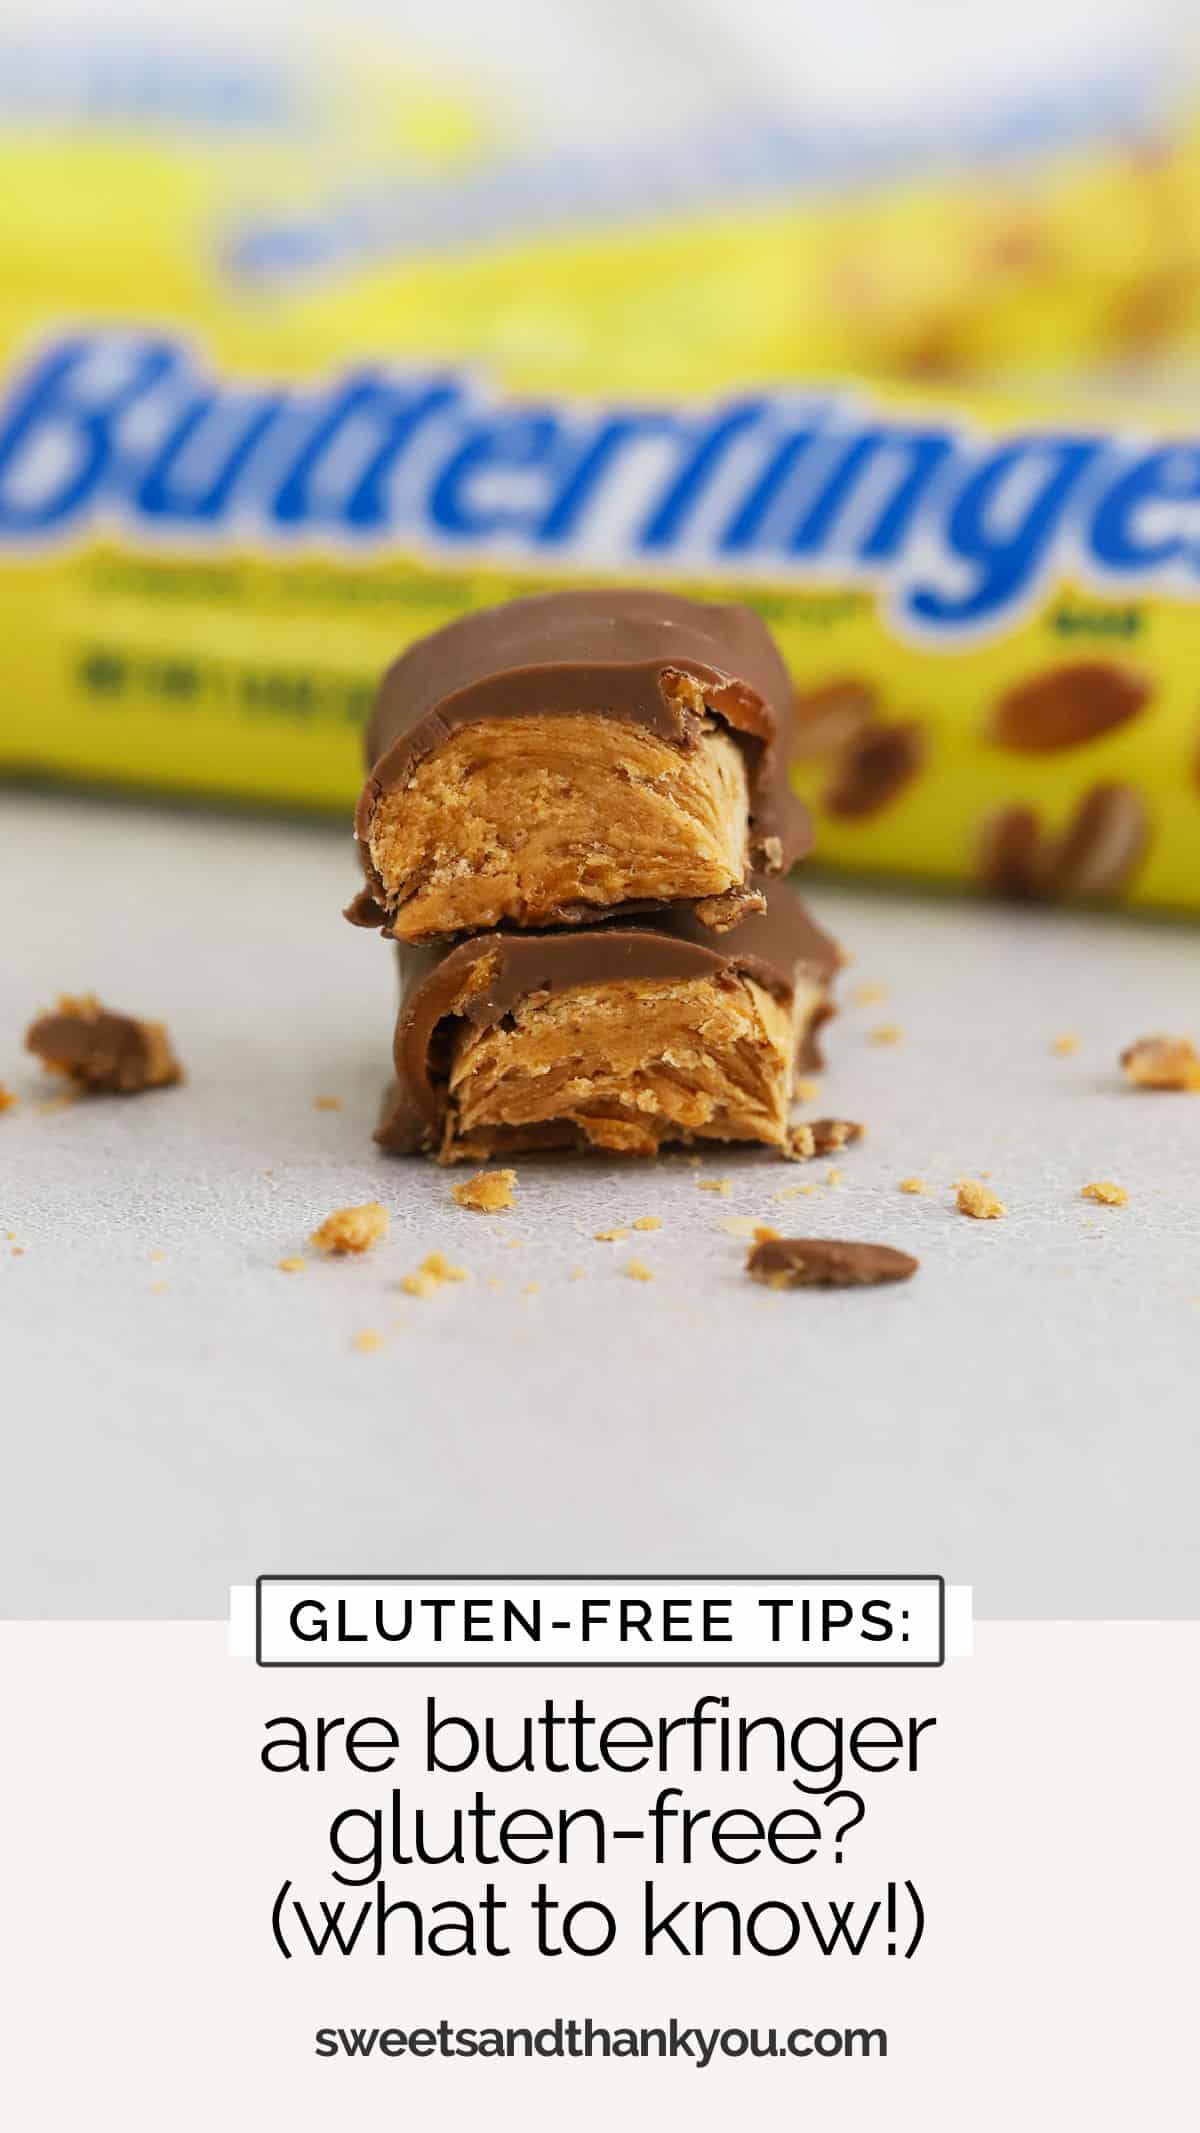 Wondering if Butterfinger bars are gluten-free? Get the scoop on which varieties are safe to eat, what to watch out for, and more! / is butterfinger gluten-free / are butterfinger candy bars gluten-free? / gluten-free candy / what candy is gluten-free / gluten-free halloween candy / gluten-free candy bars 